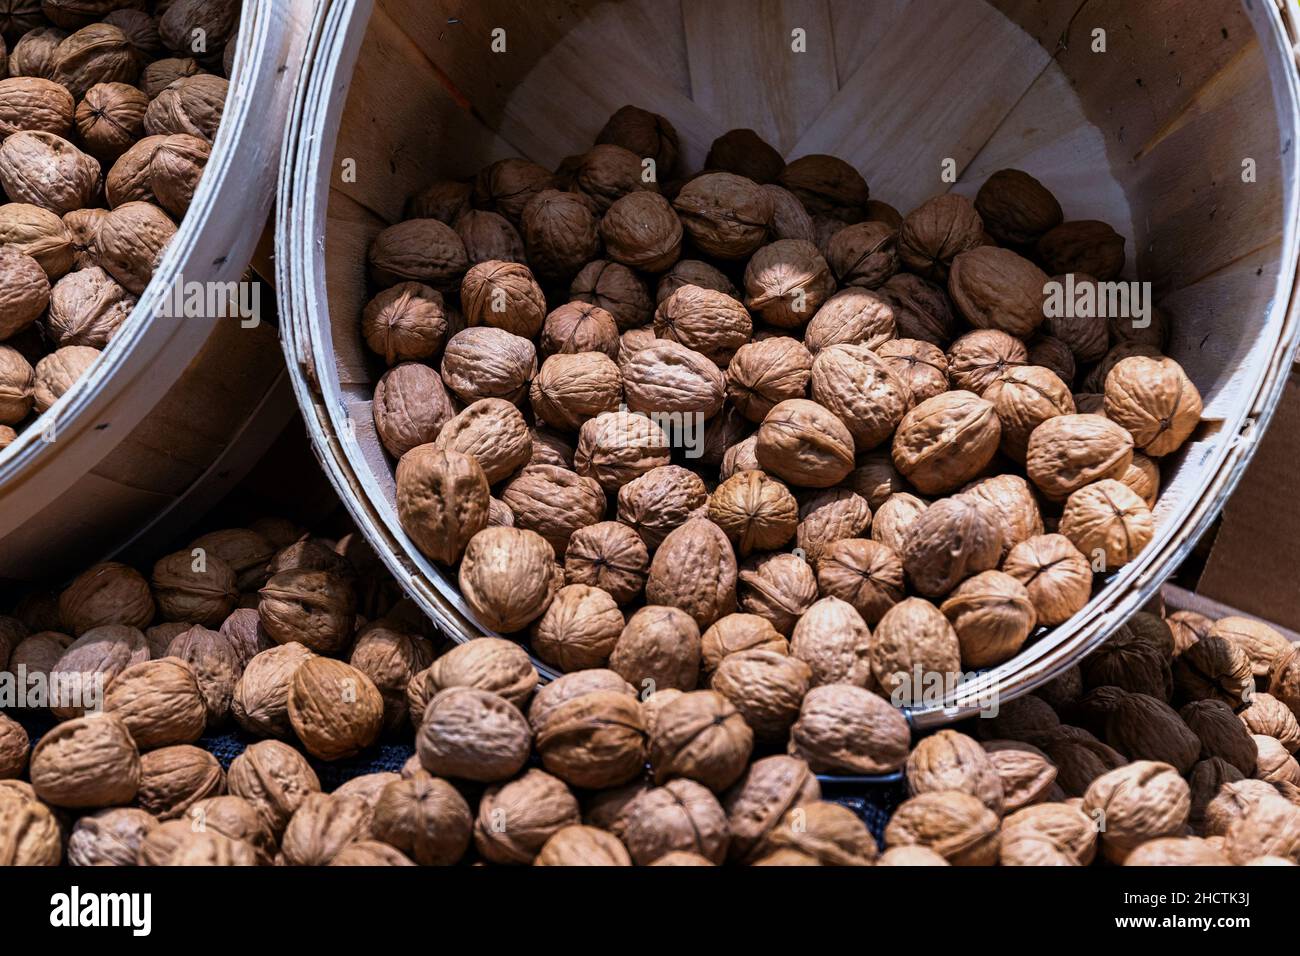 Nuts exhibit on a store Stock Photo